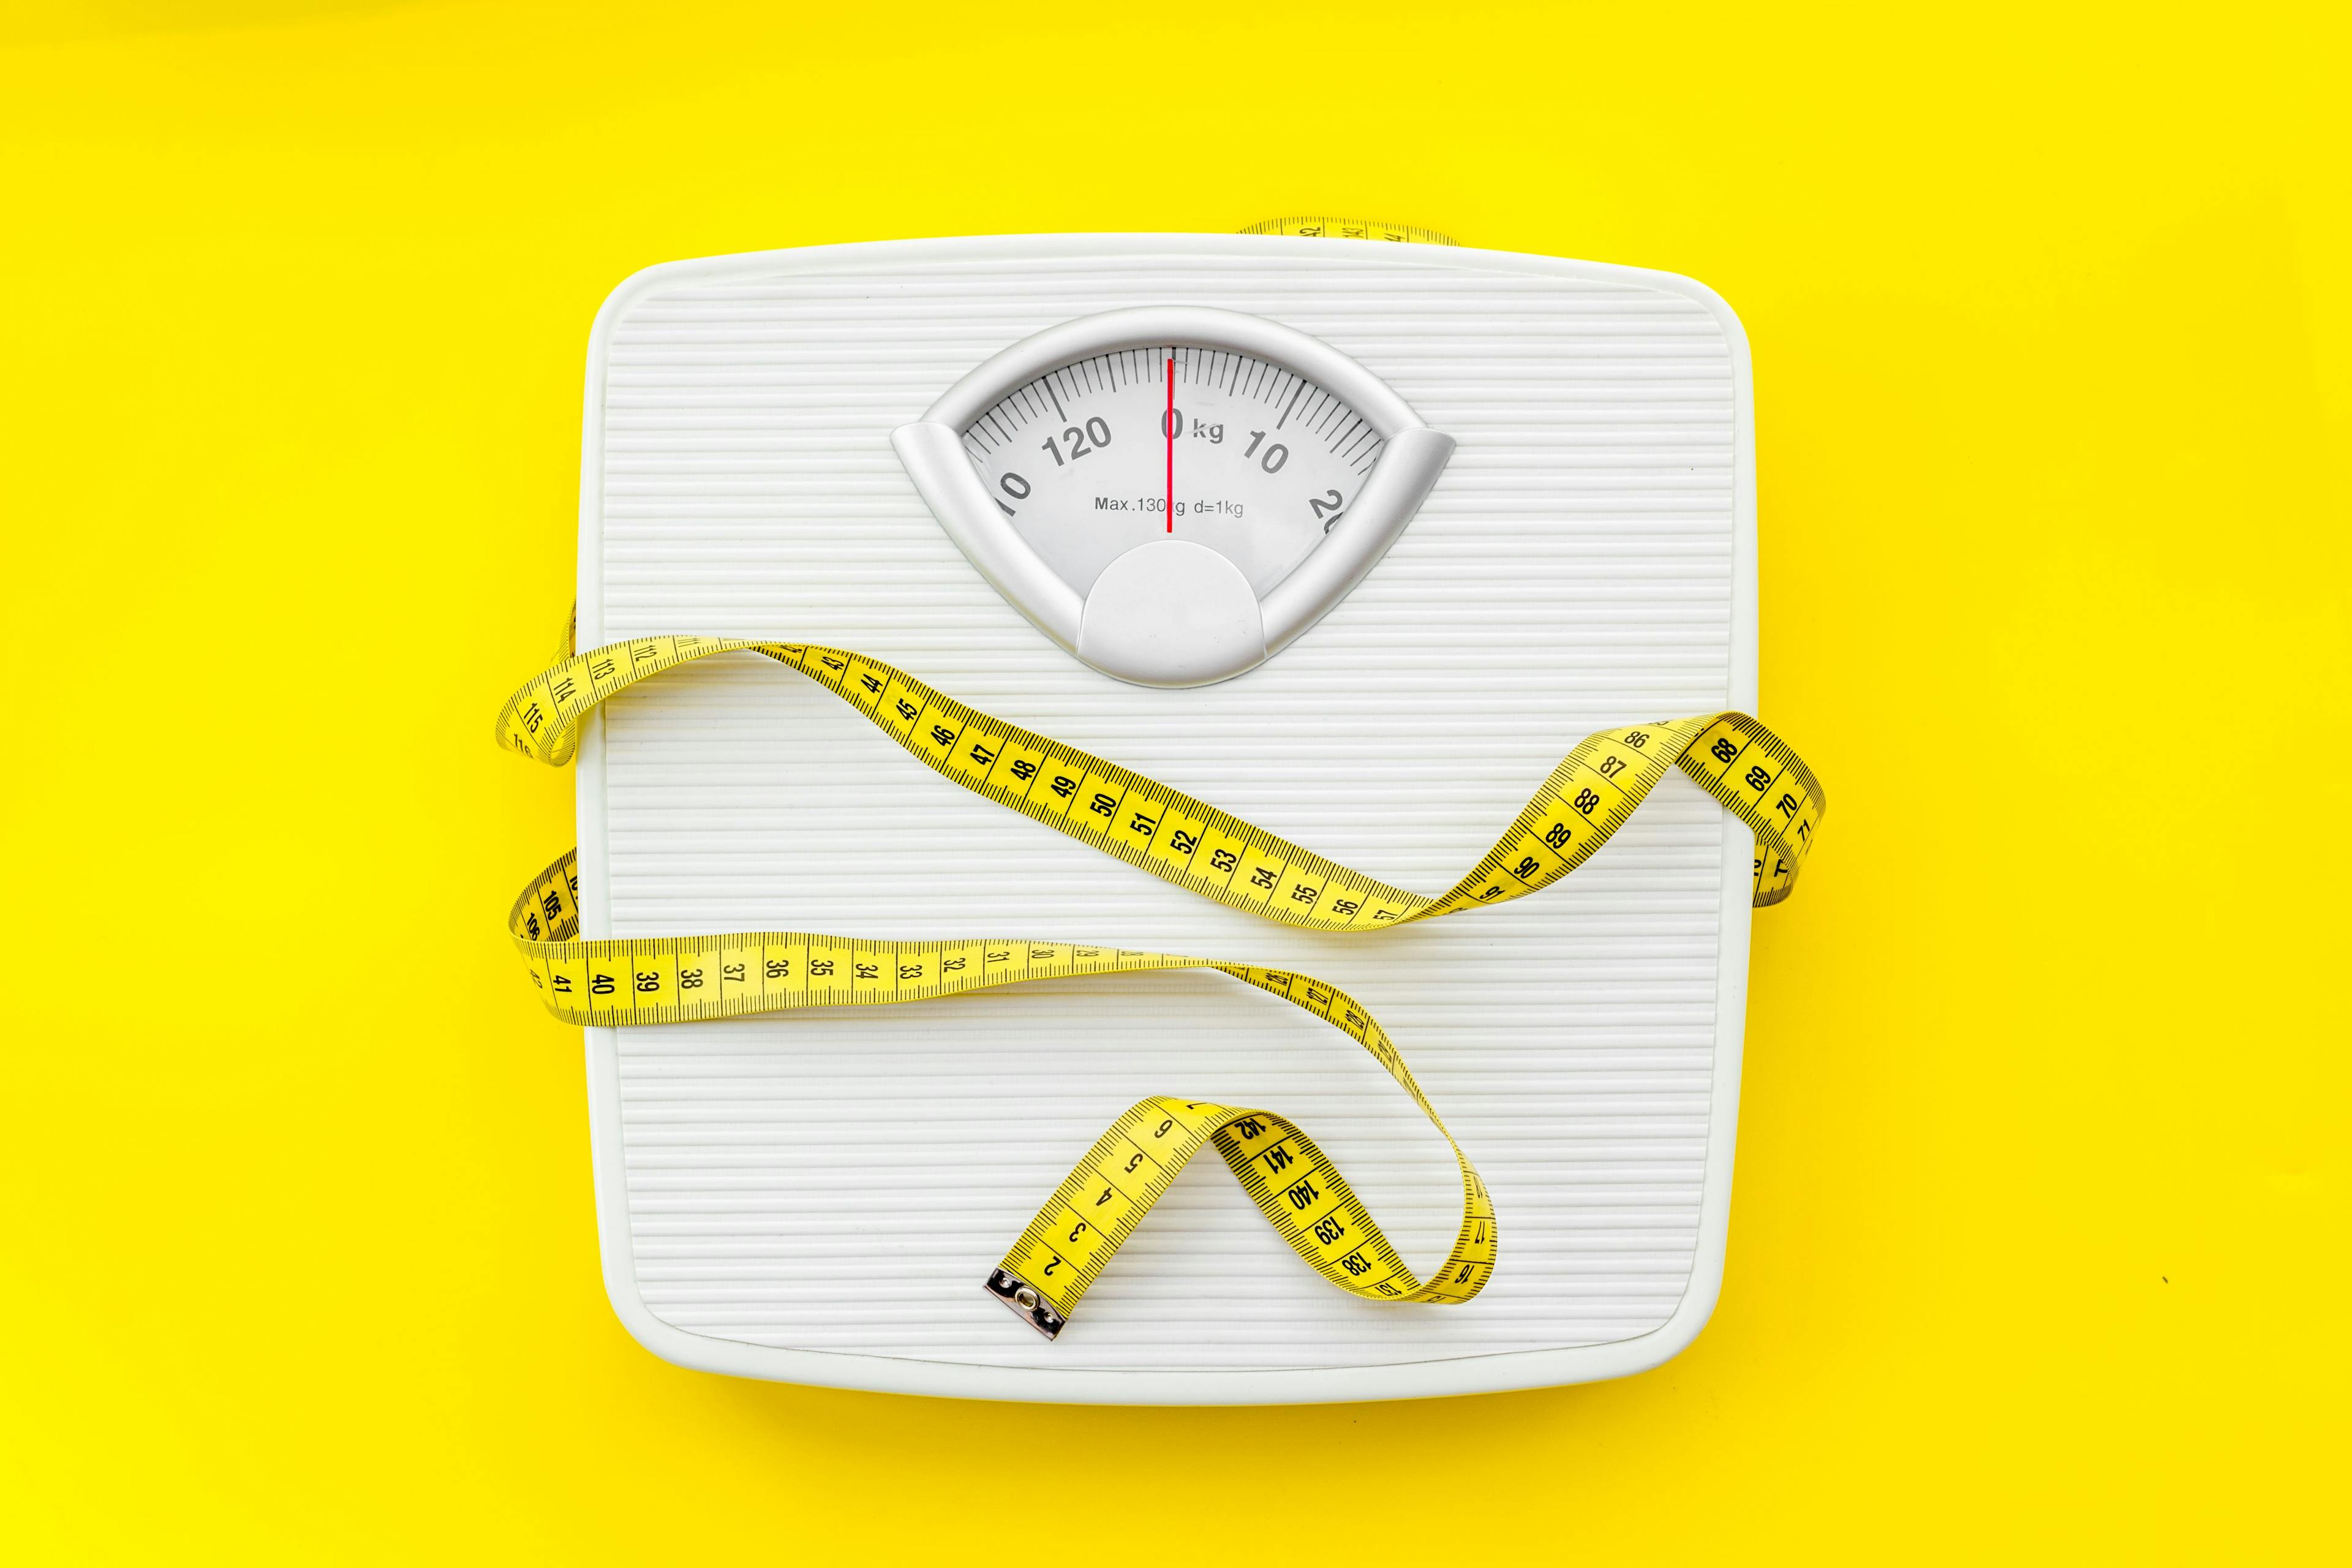 Scale and measuring tape for weight loss / 9dreamstudio - stock.adobe.com